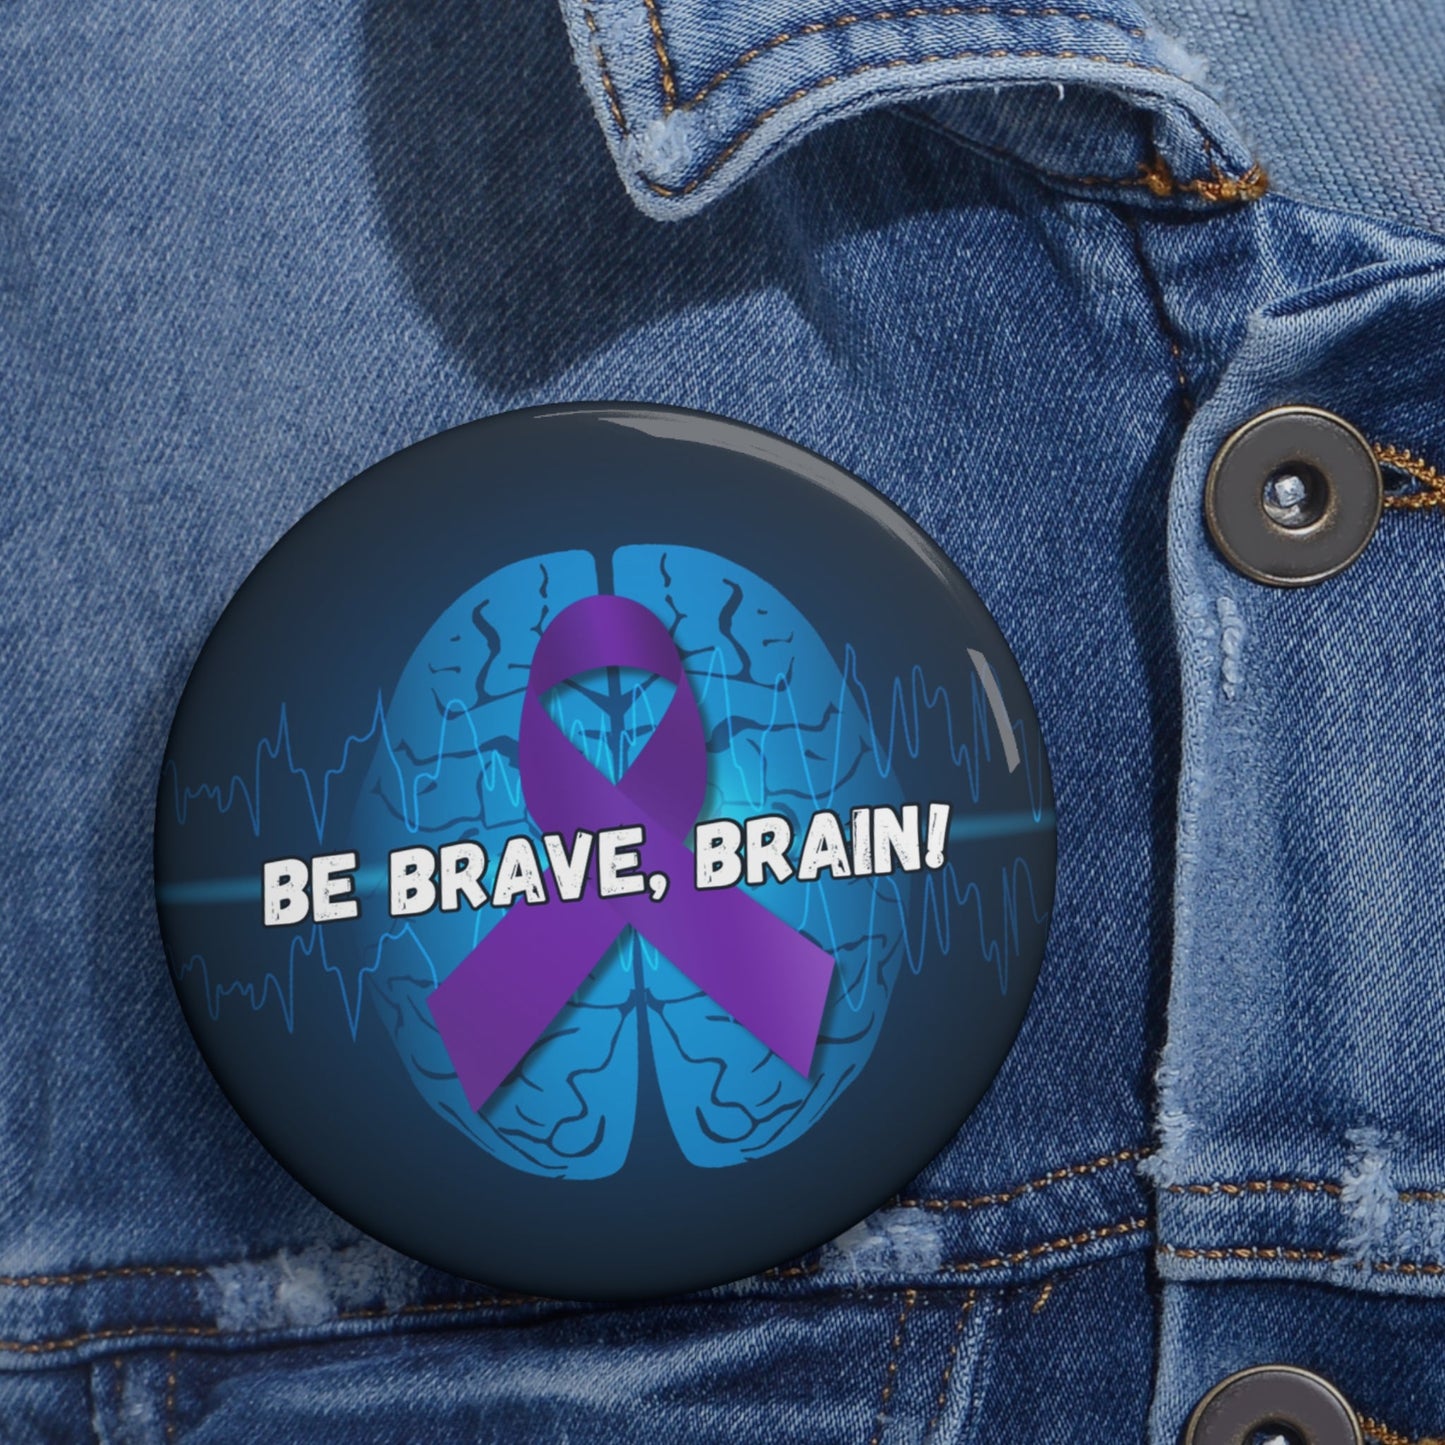 Be Brave Epilepsy Awareness Pin Buttons - Accessories - Epileptic Al’s Shop